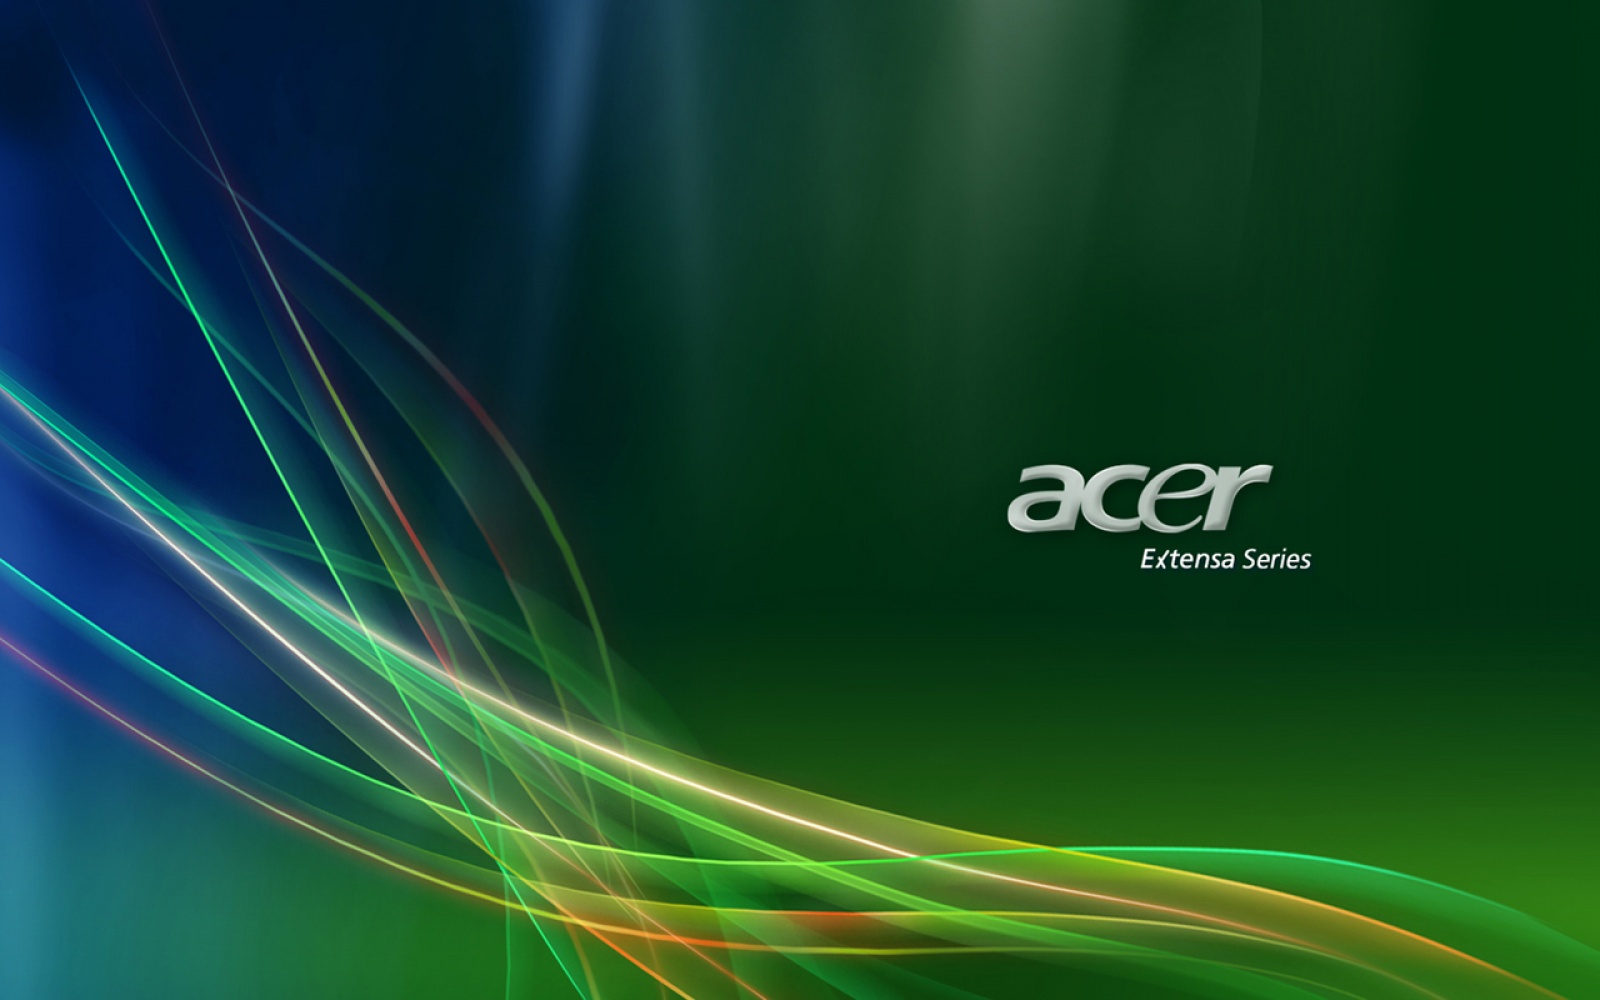 50 Free Wallpapers For Acer Laptops On Wallpapersafari